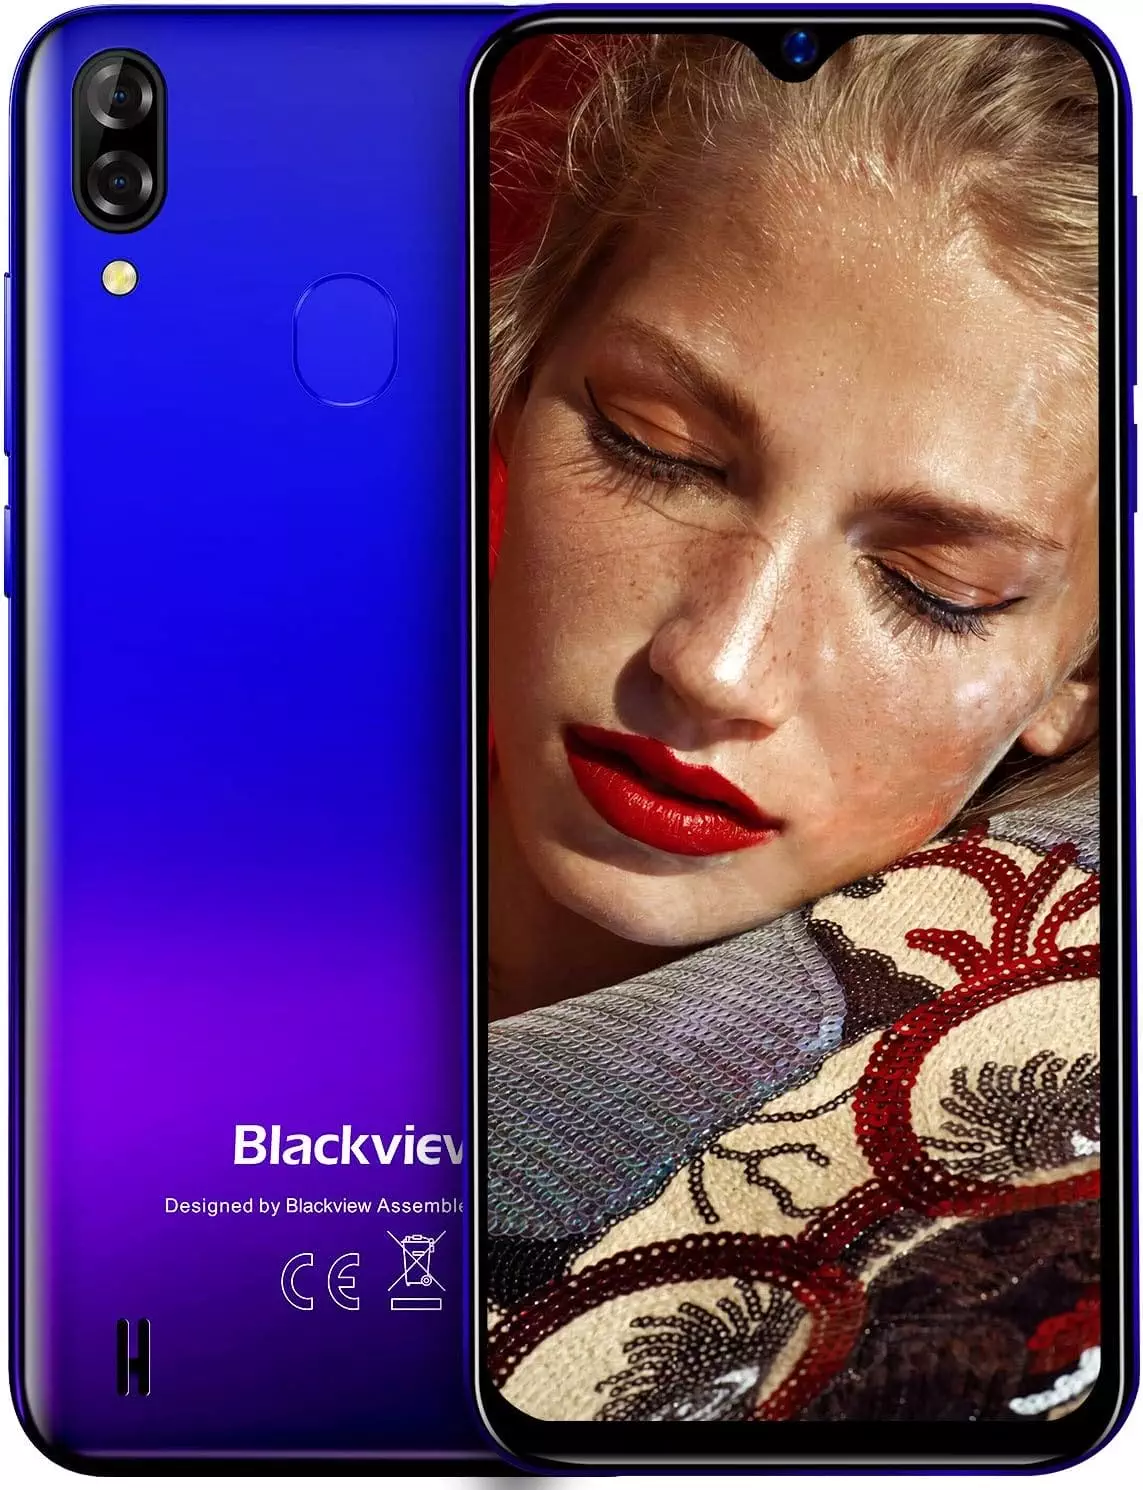 Blackview A60 Pro Dual SIM 4G Smartphone without Contract Affordable - 6.1 Inch HD Display 3GB RAM + 16GB ROM, 256GB Expandable, 4080mAh Battery 8MP + 5MP Dual Camera Android 9.0 Mobile Phone - GPS/Face ID